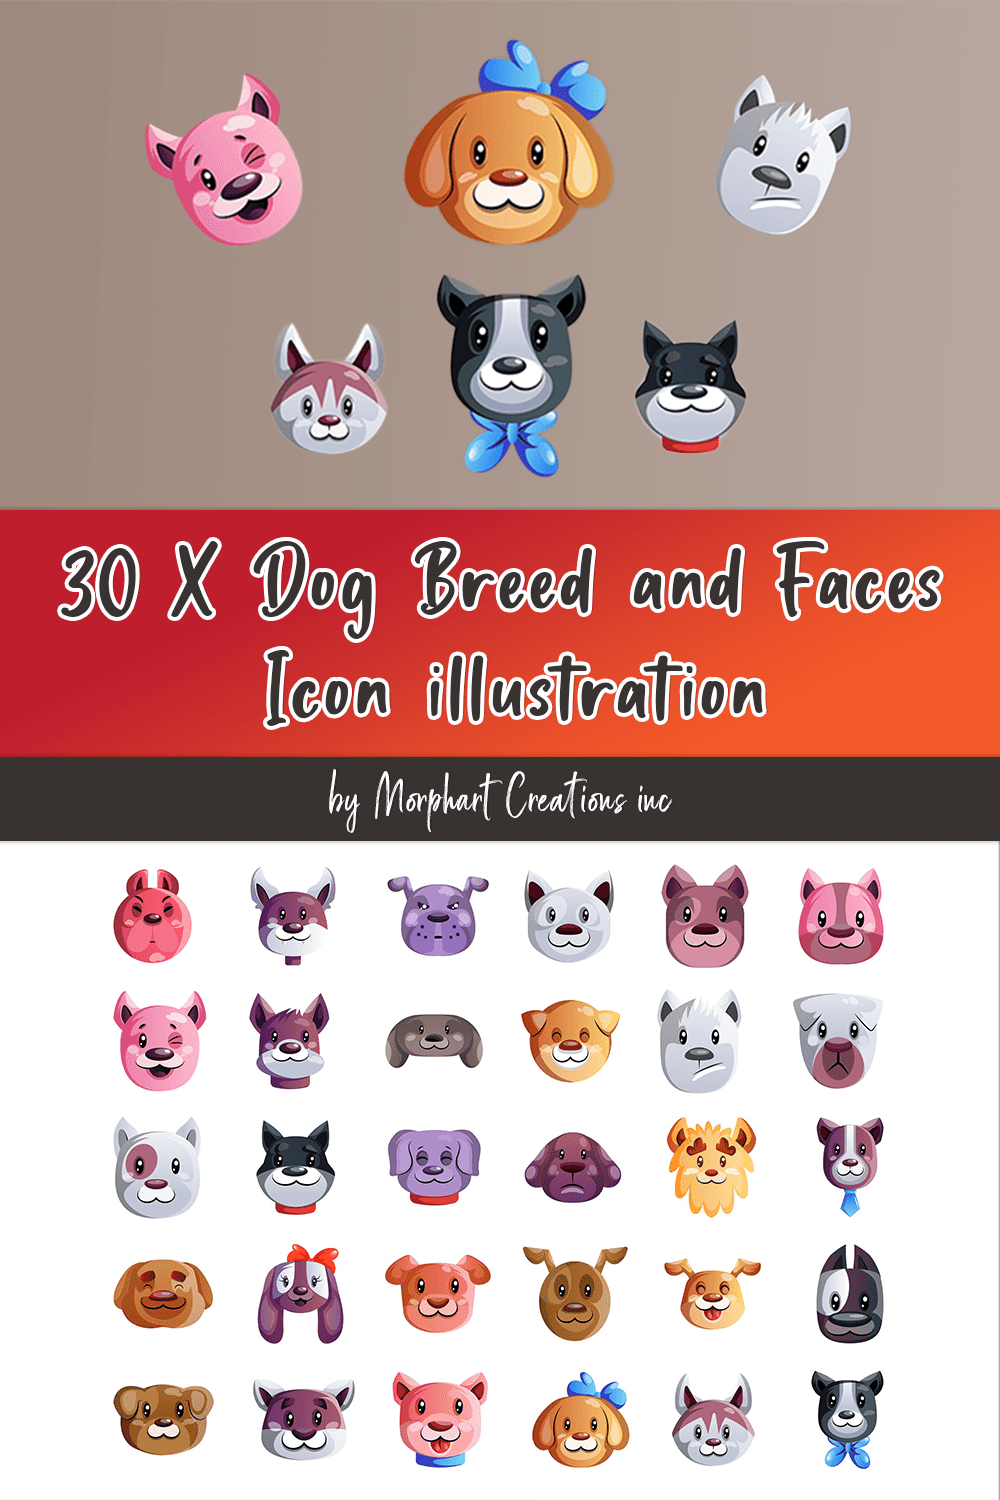 Dog breed and faces icon illustration of pinterest.